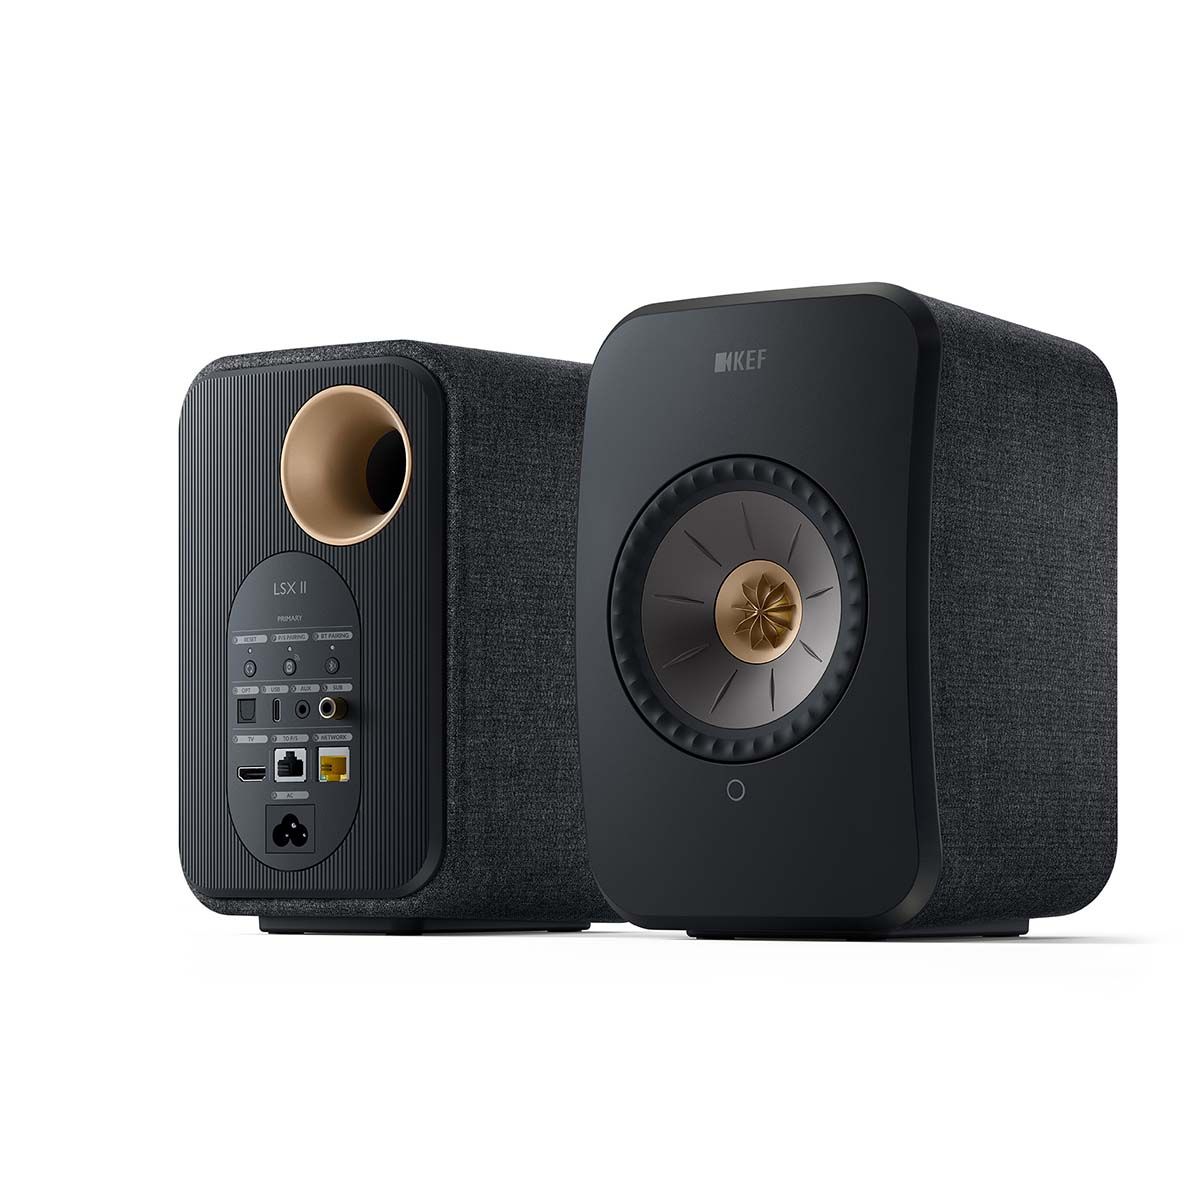 KEF LSX II Wireless HiFi Speakers - angled view showing front and rear of speakers